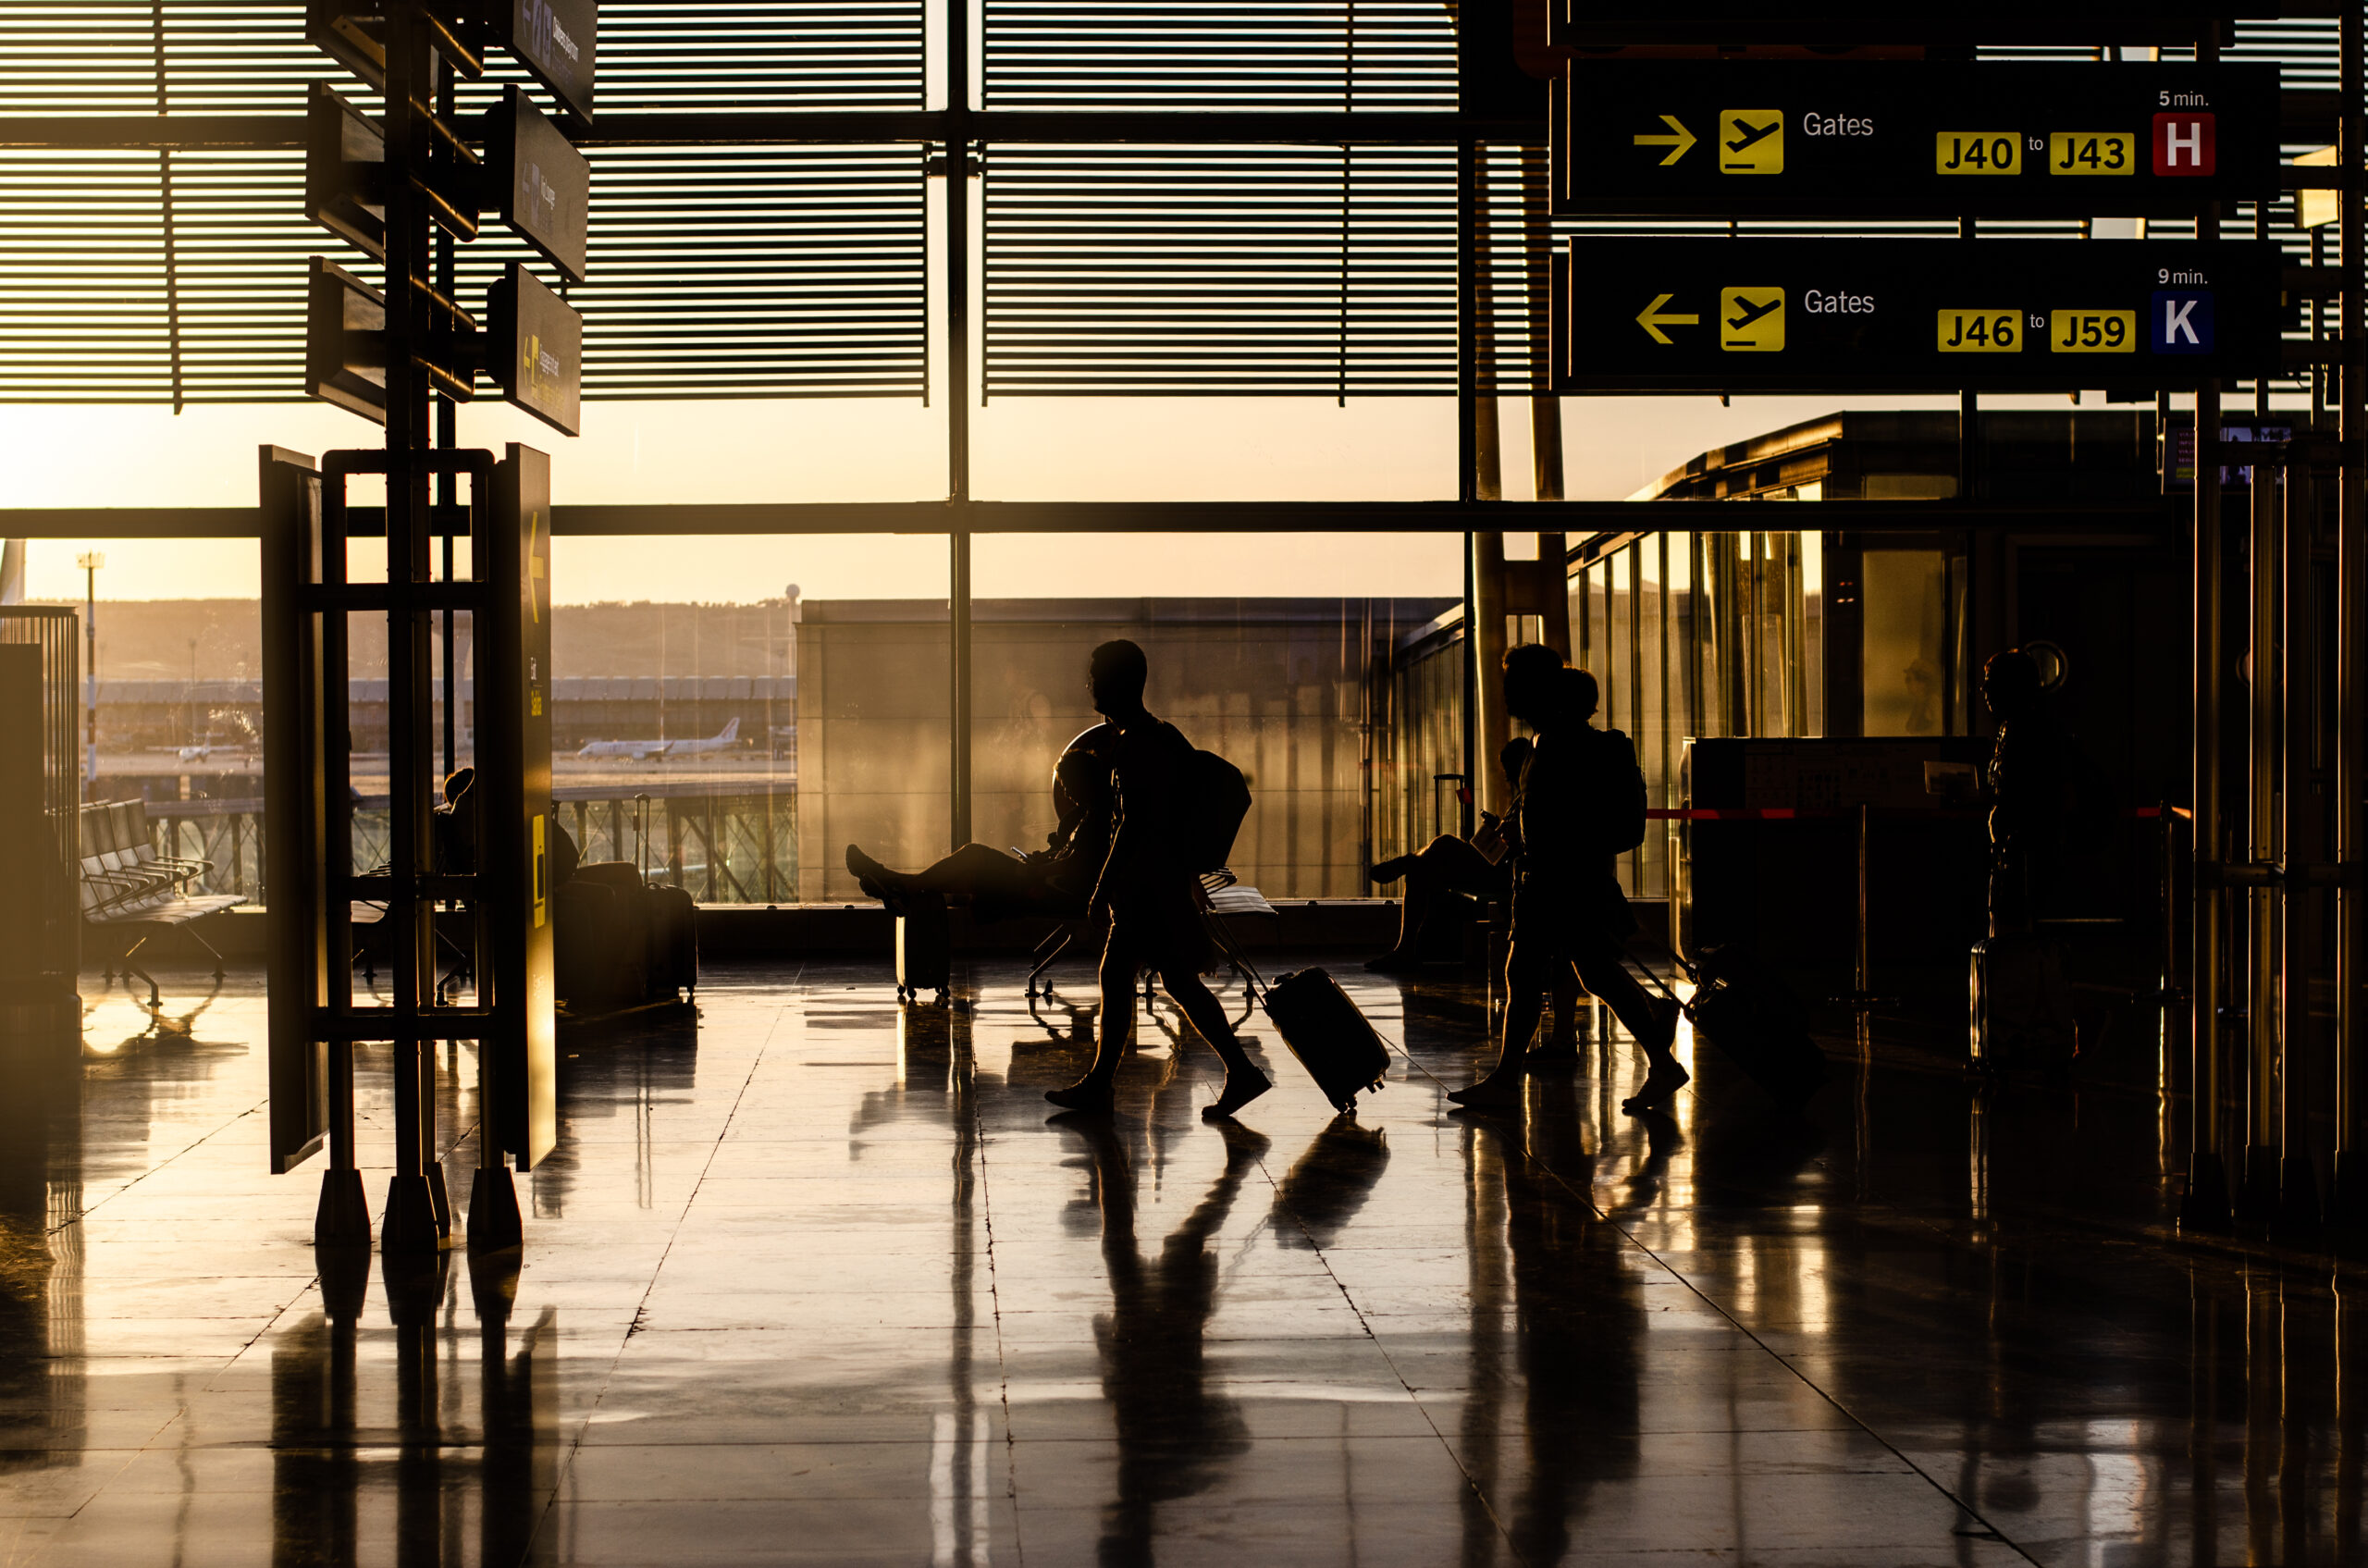 Silhouette of people walking inside a airport terminal